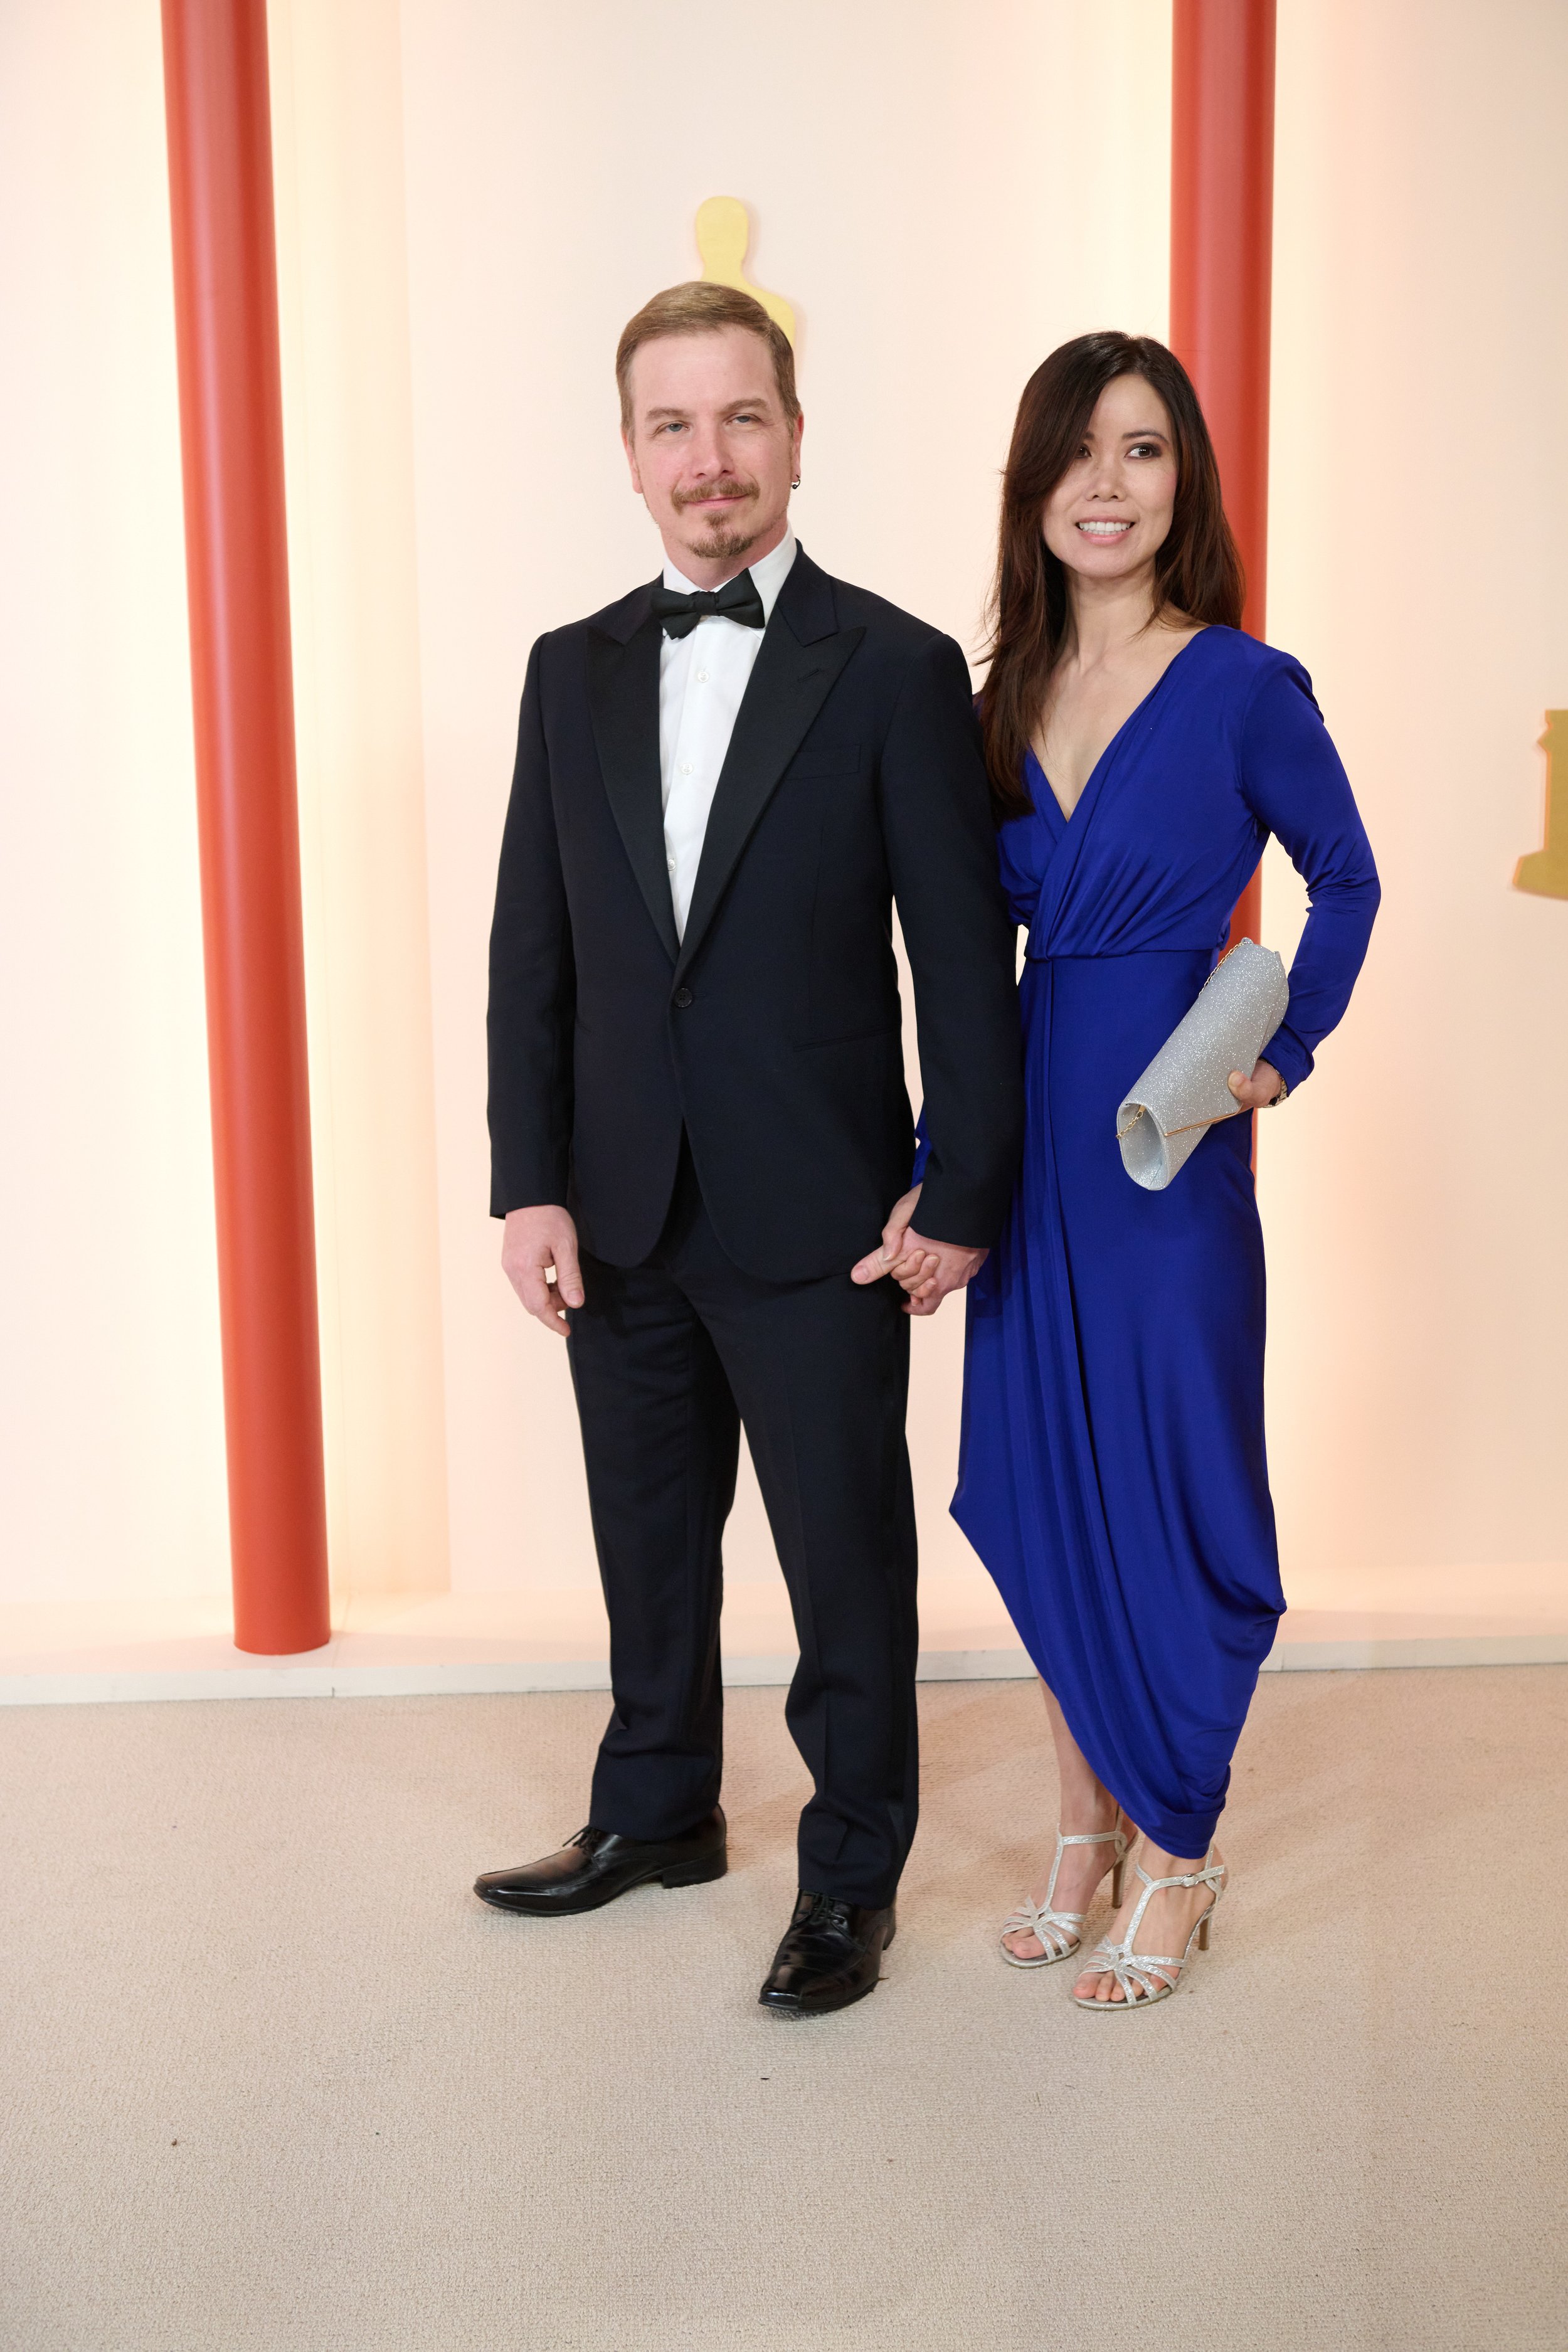 Oscar® nominee Adrien Morot and guest arrive on the red carpet of The 95th Oscars